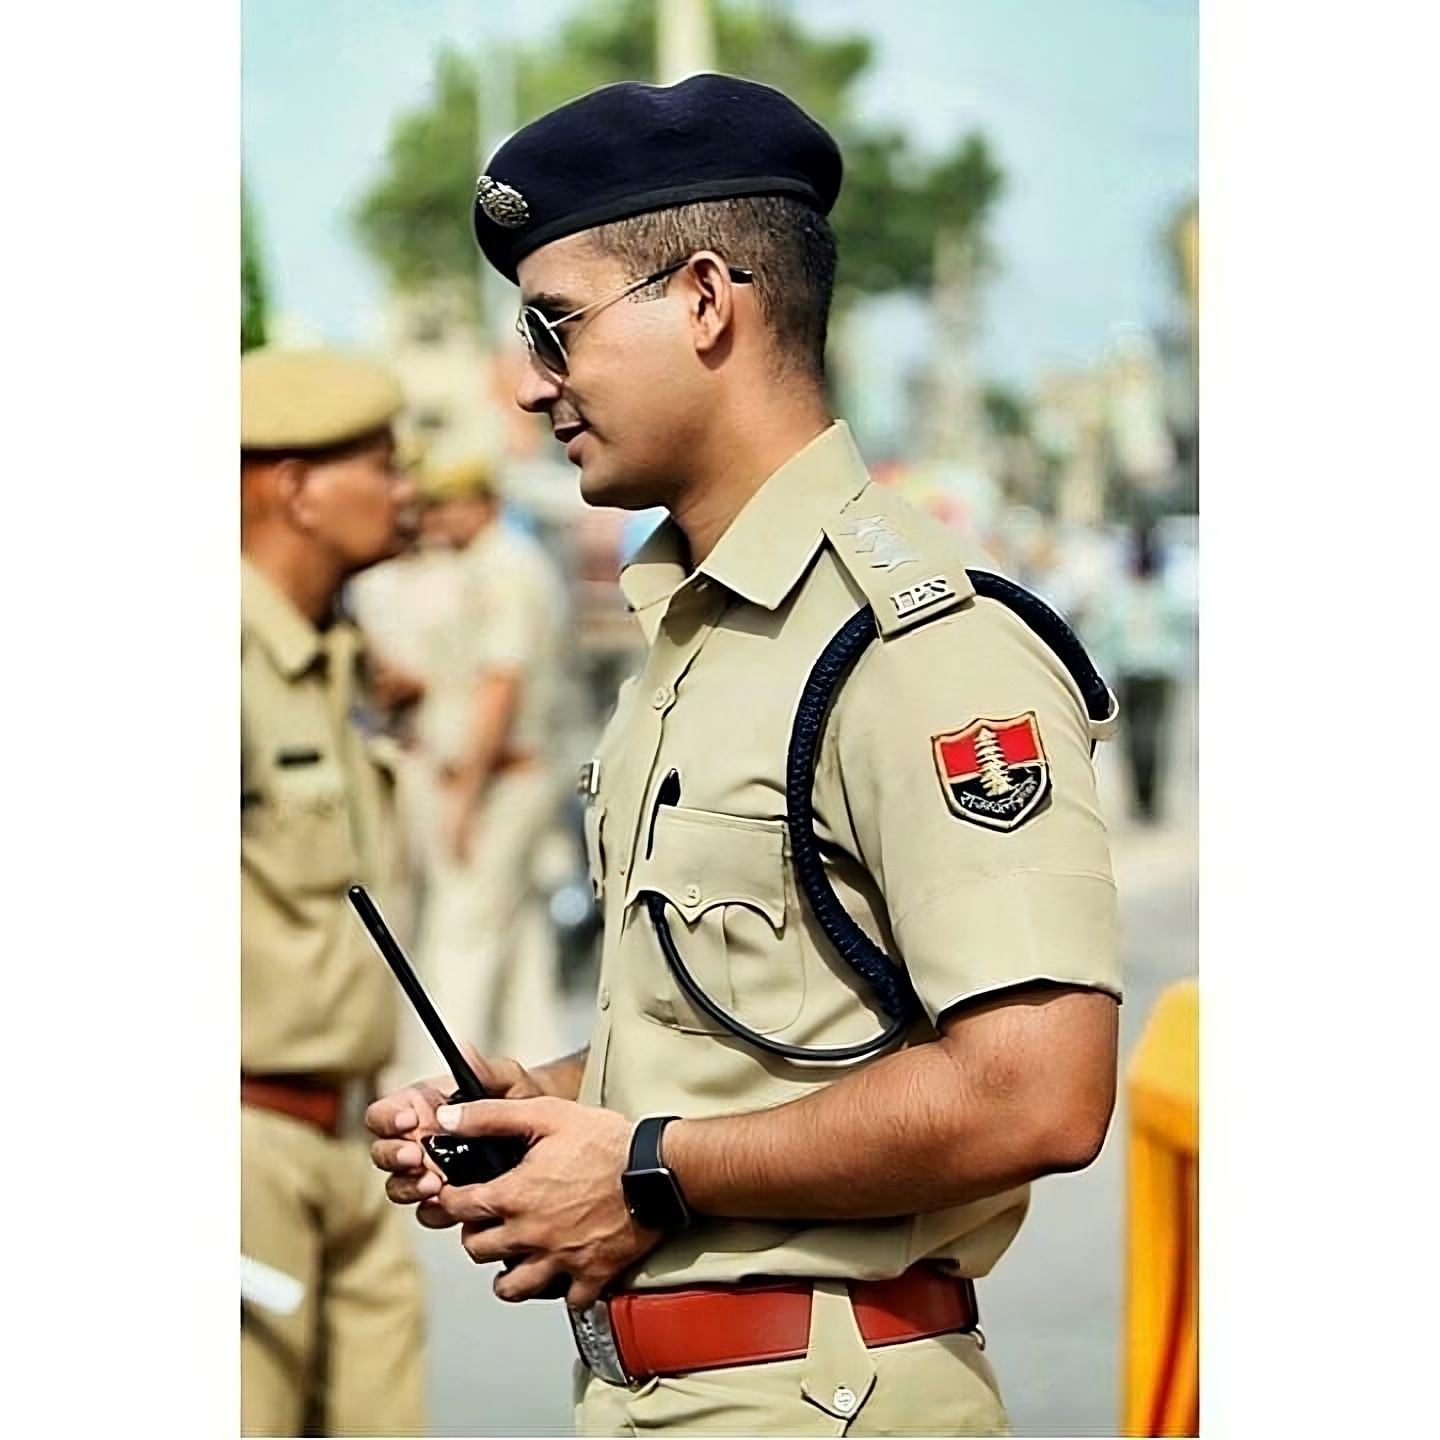 Indian Police - police